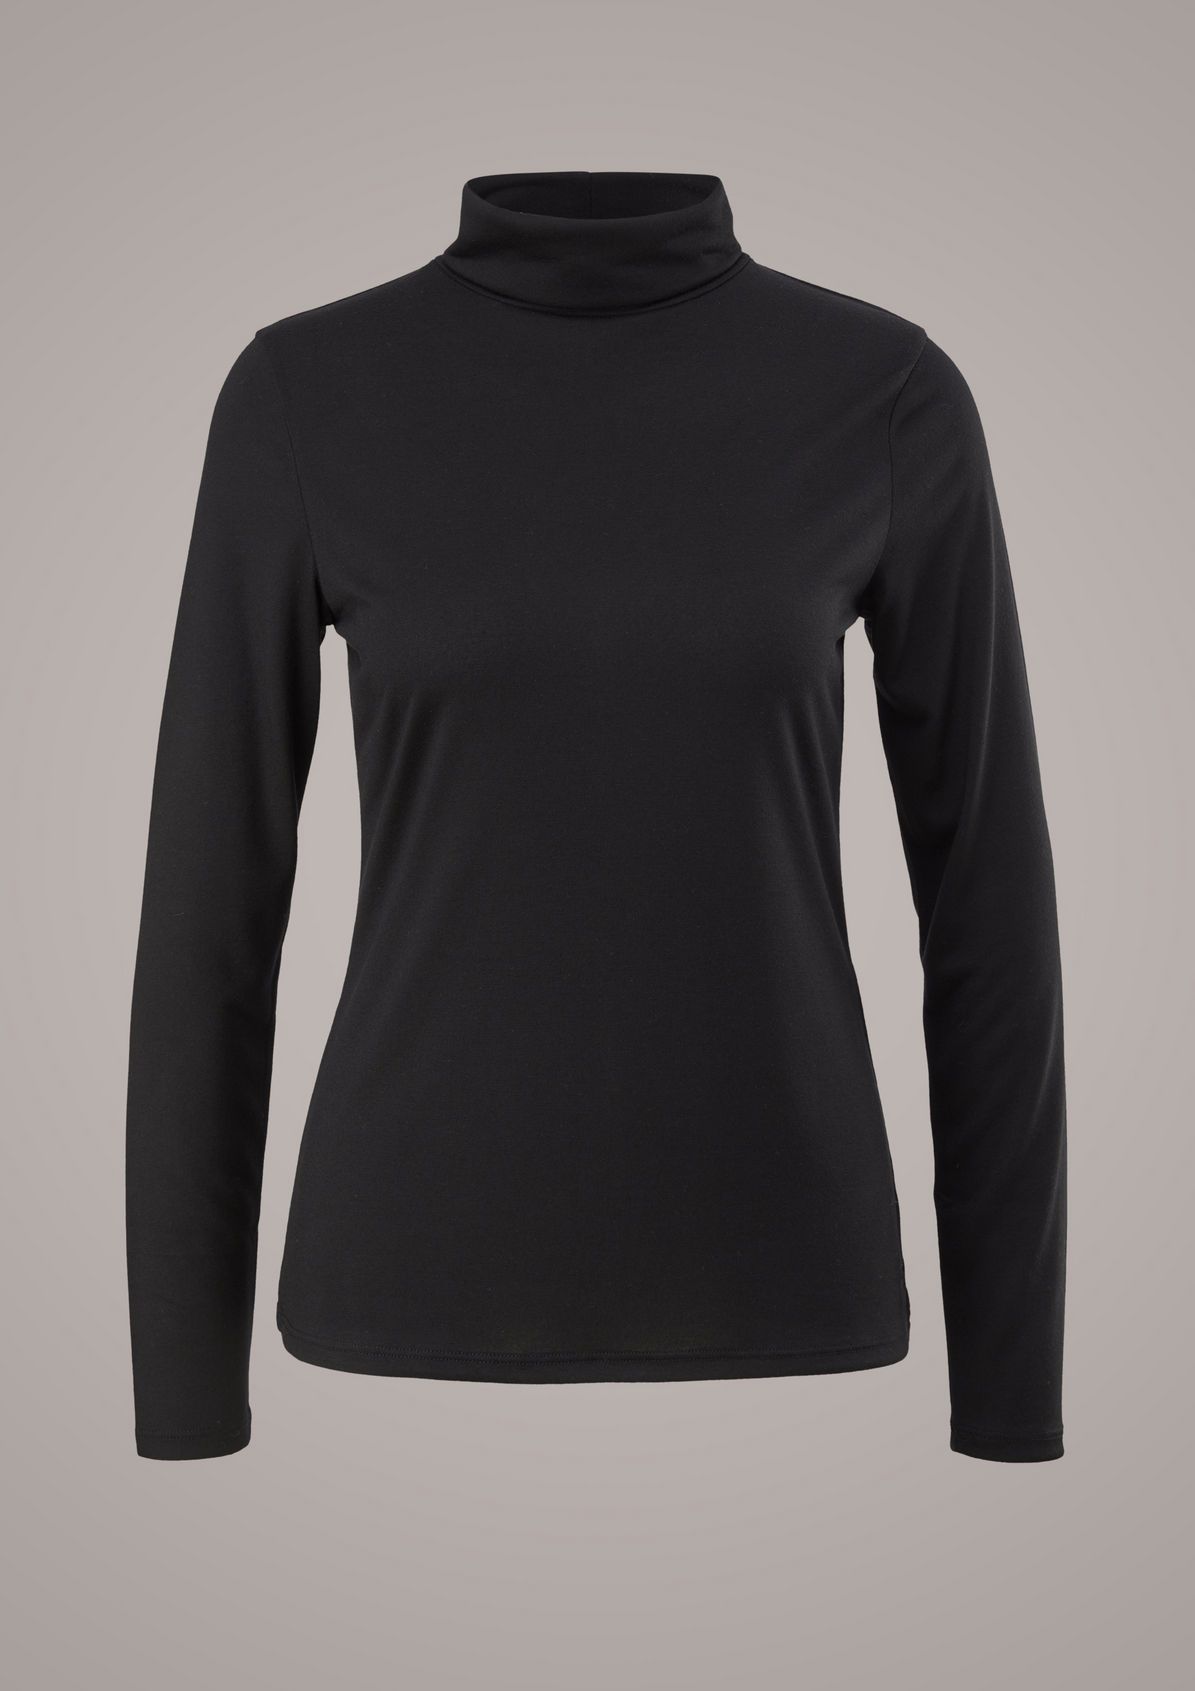 Jersey top with a turtleneck collar from comma